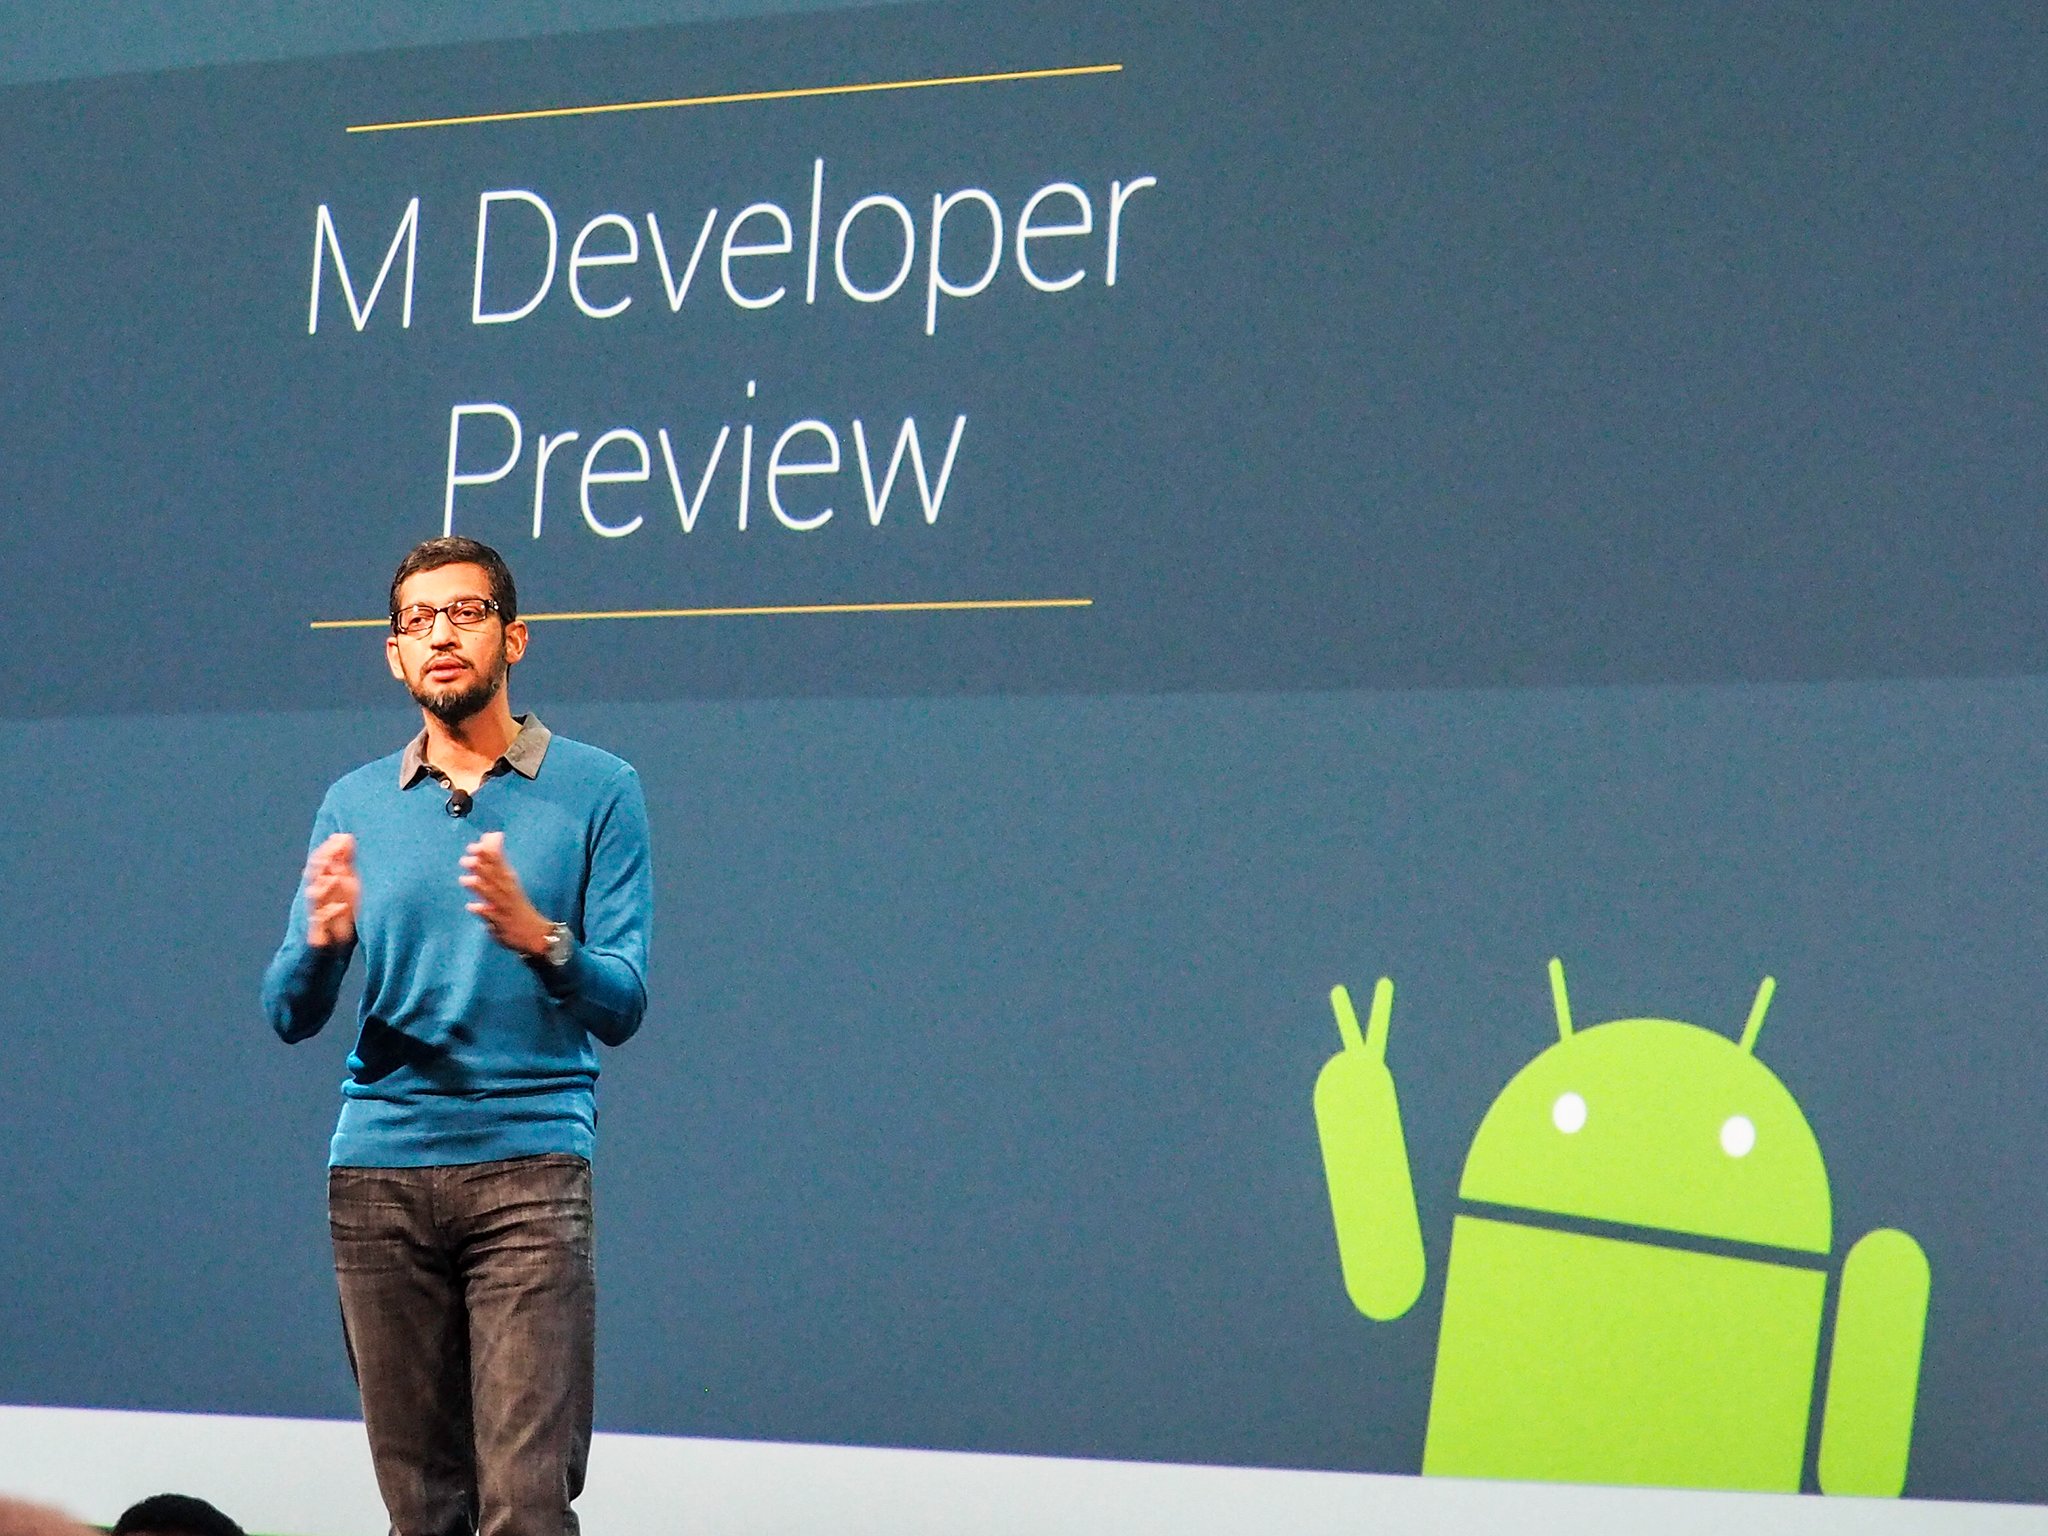 Sundar and Android M